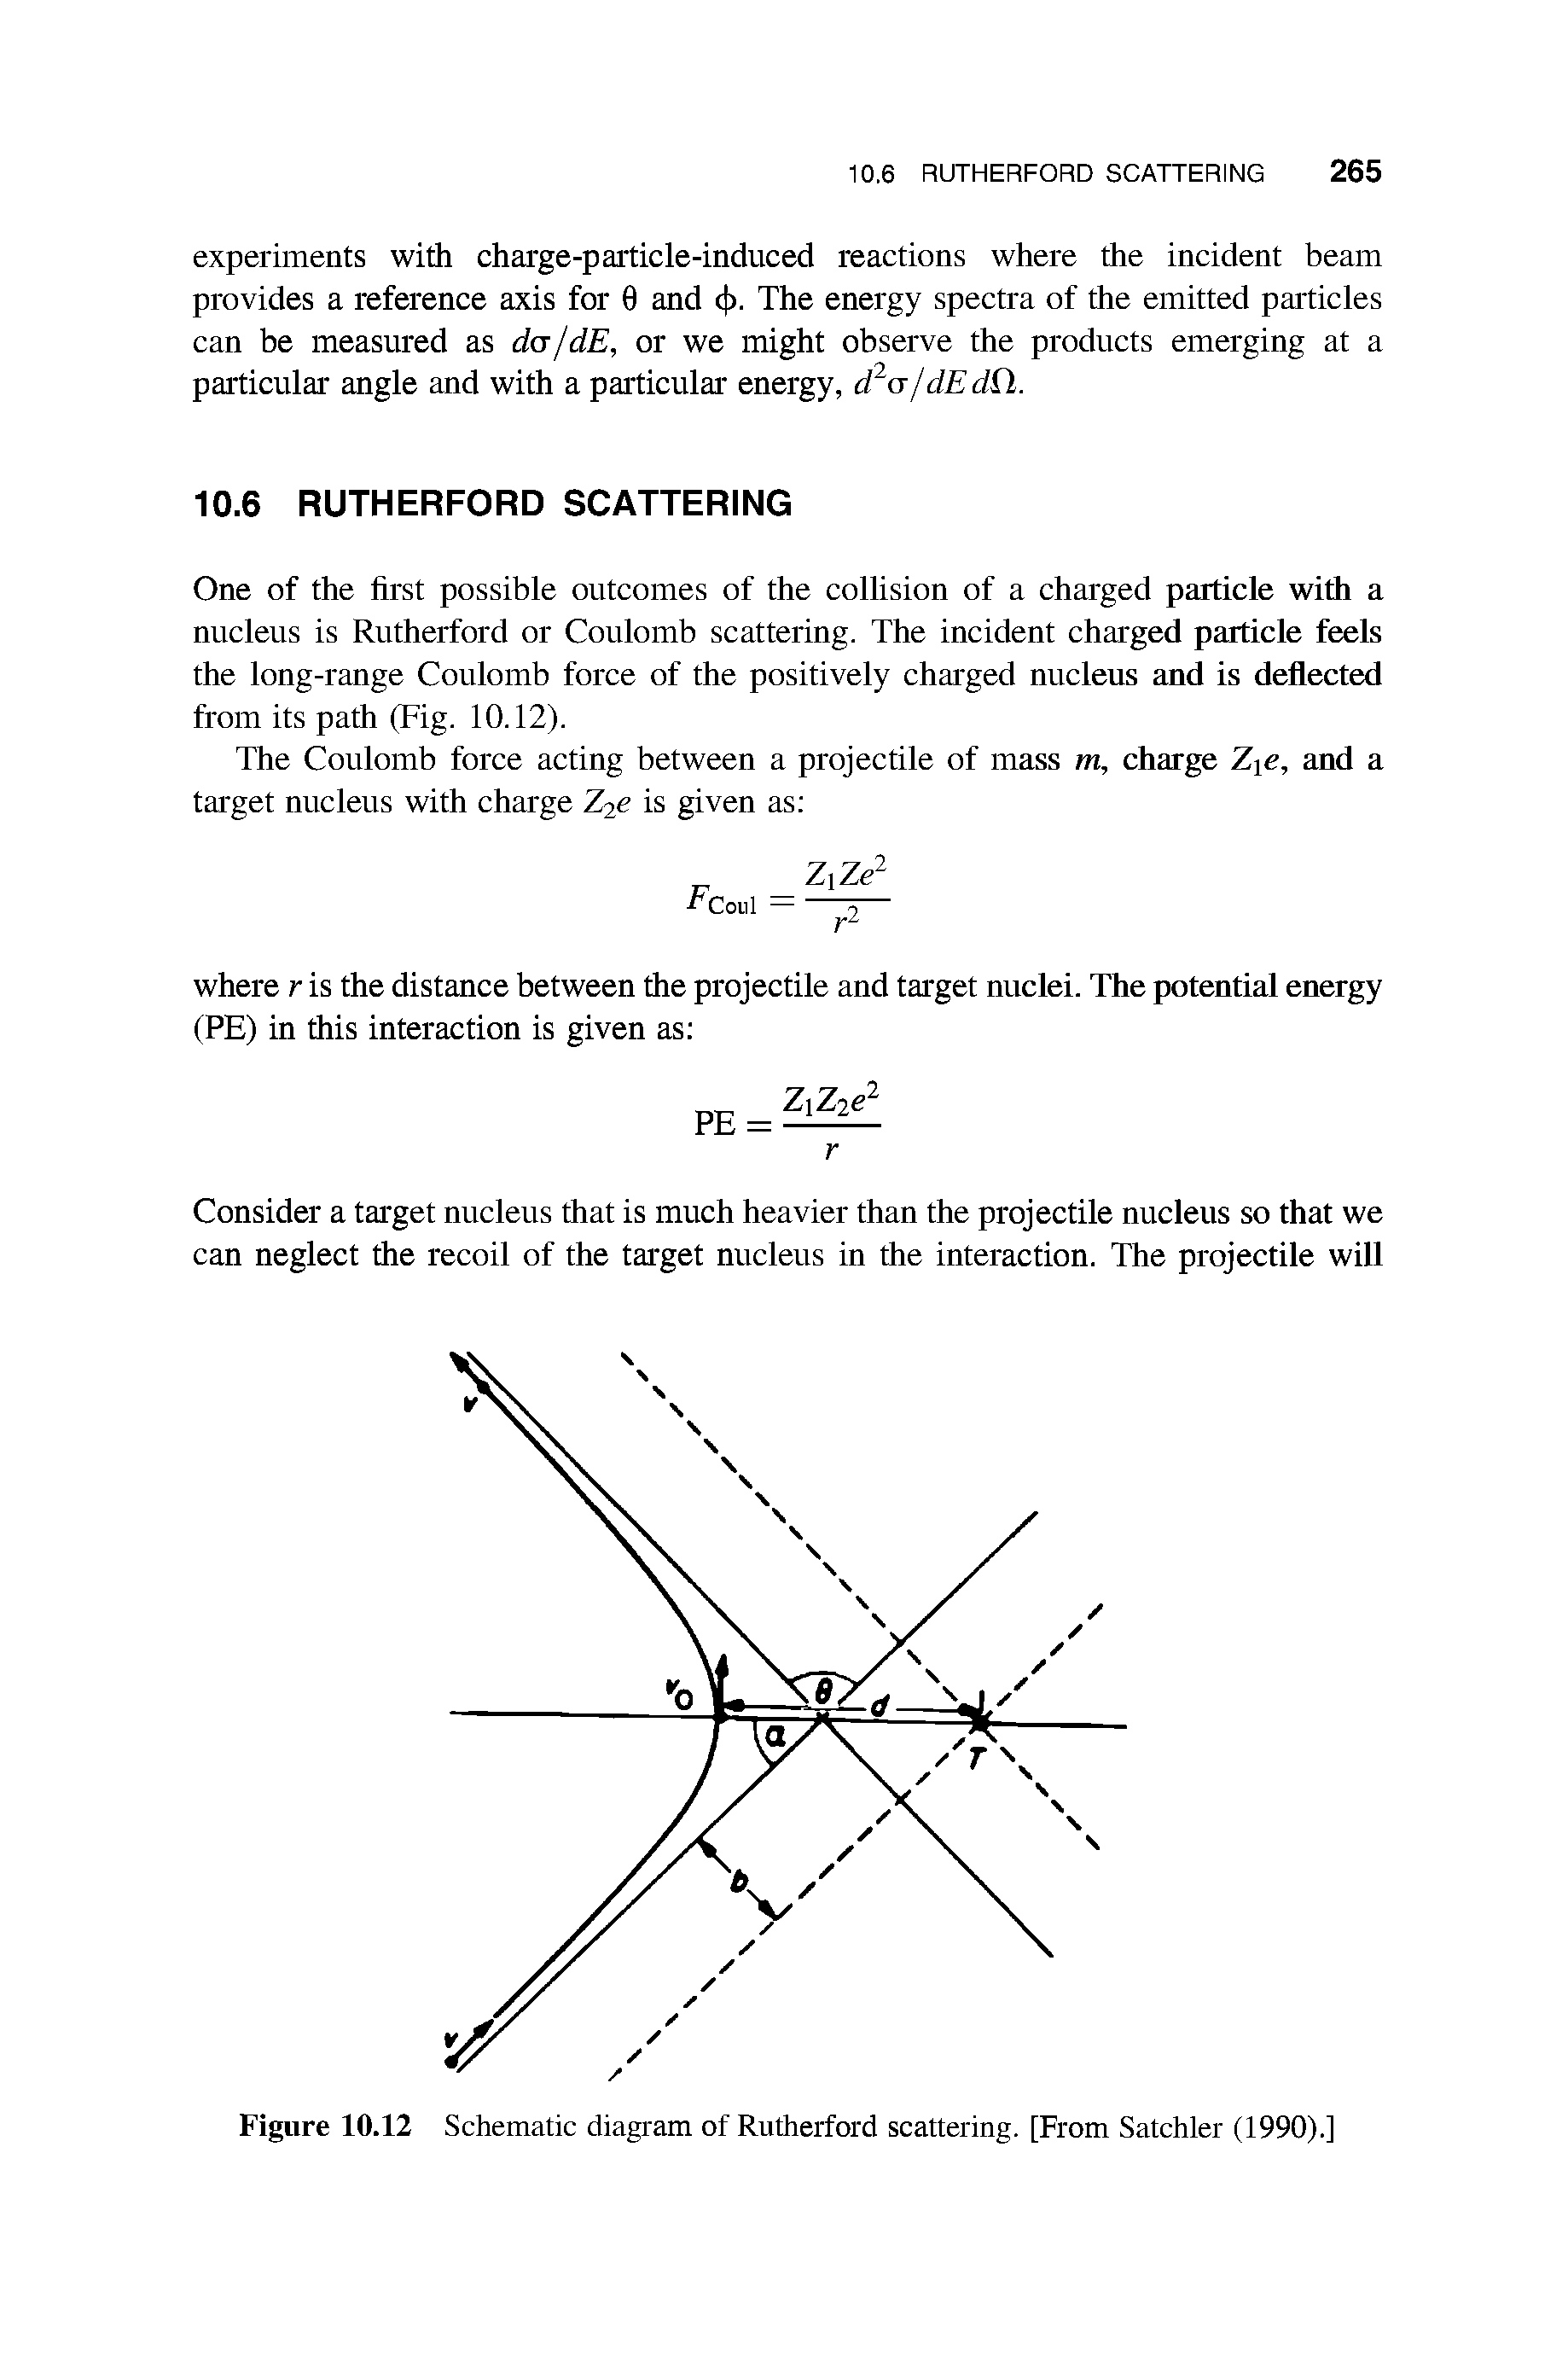 Figure 10.12 Schematic diagram of Rutherford scattering. [From Satchler (1990).]...